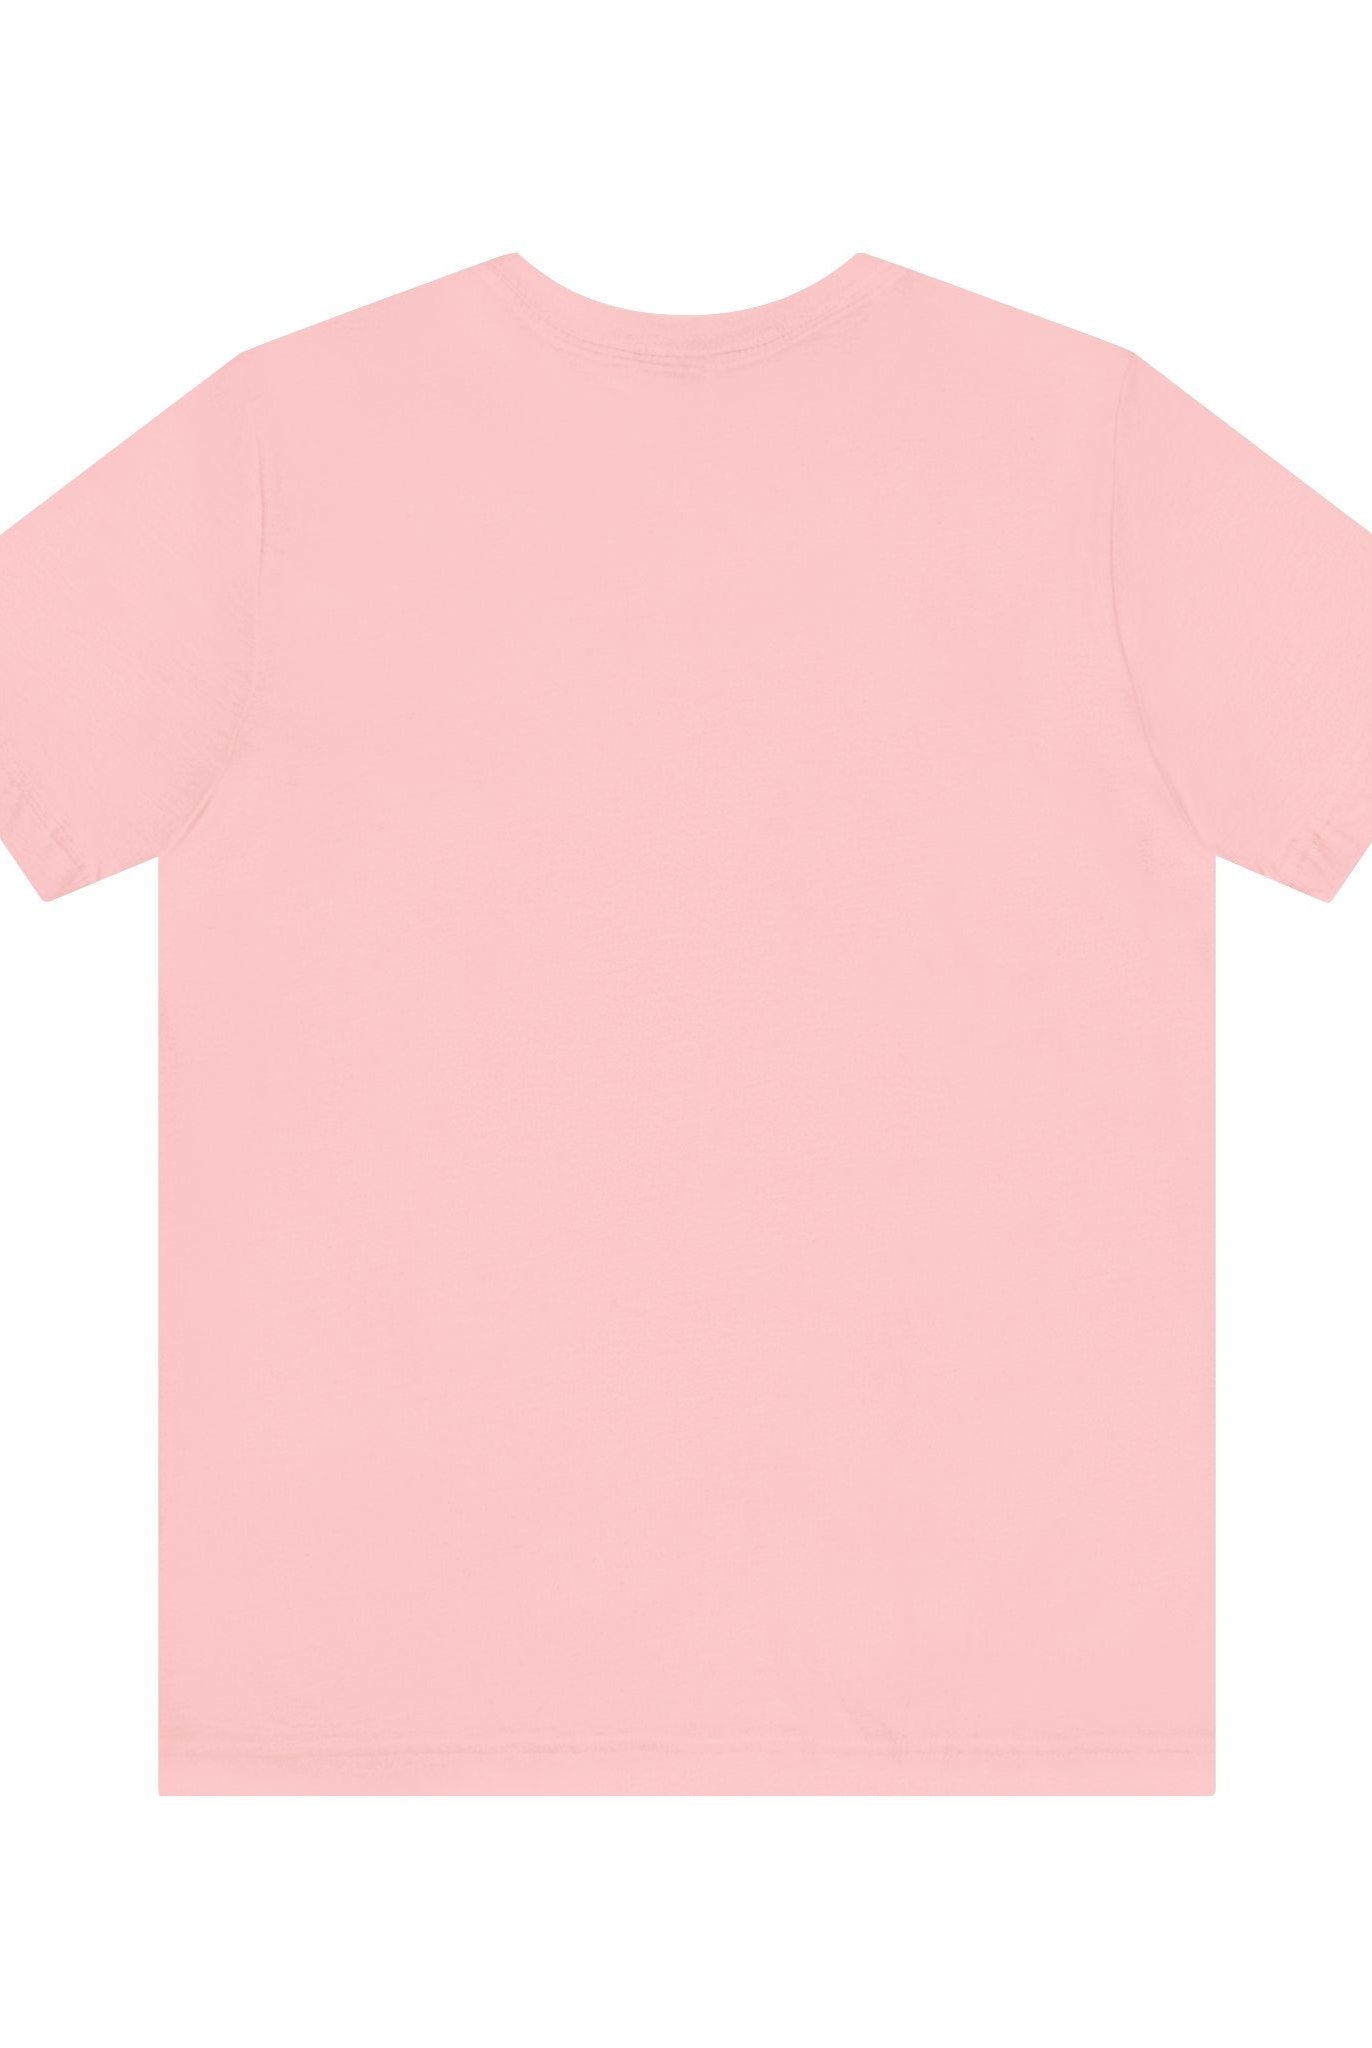 Pink t-shirt with white logo printed on the front - Be Amazing - Bella & Canvas - Soulshinecreators - Unisex